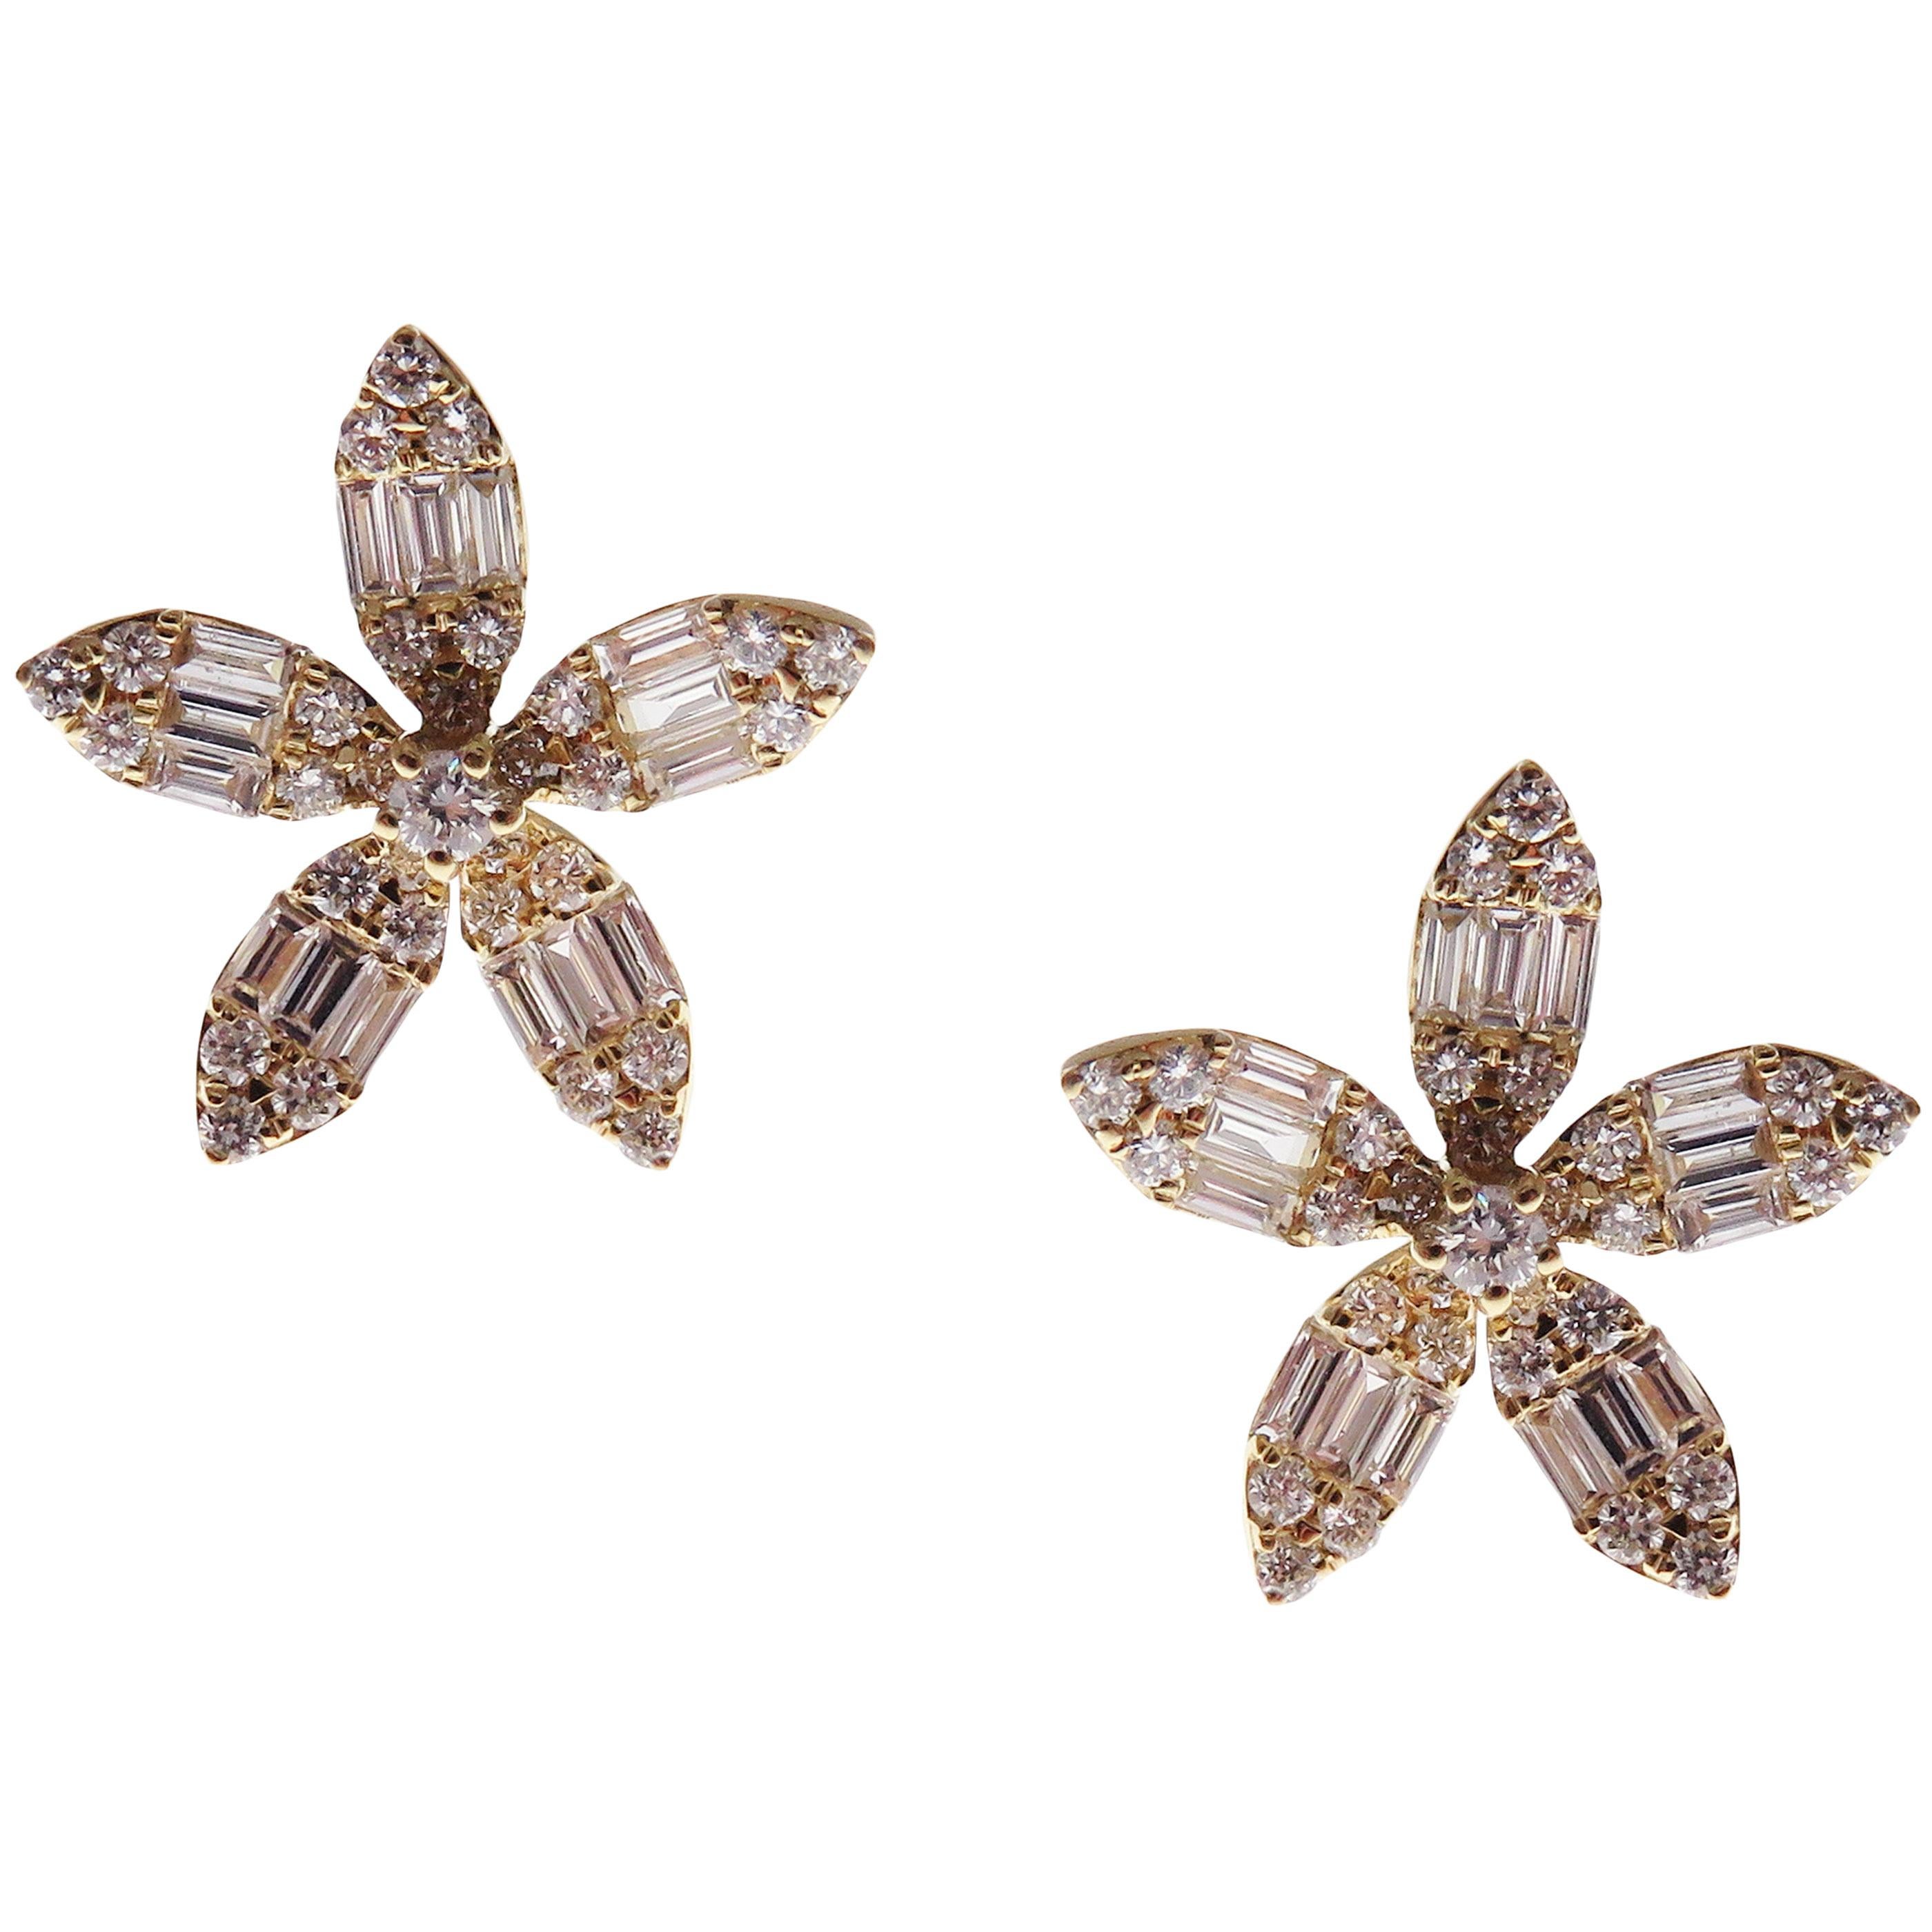 These classic flower stud earrings with round and baguette white diamonds are crafted in 18-karat yellow gold, featuring 62 round white diamonds totaling of 0.45 carats and 30 baguette white diamonds totaling of 0.50 carats.
These earrings come with